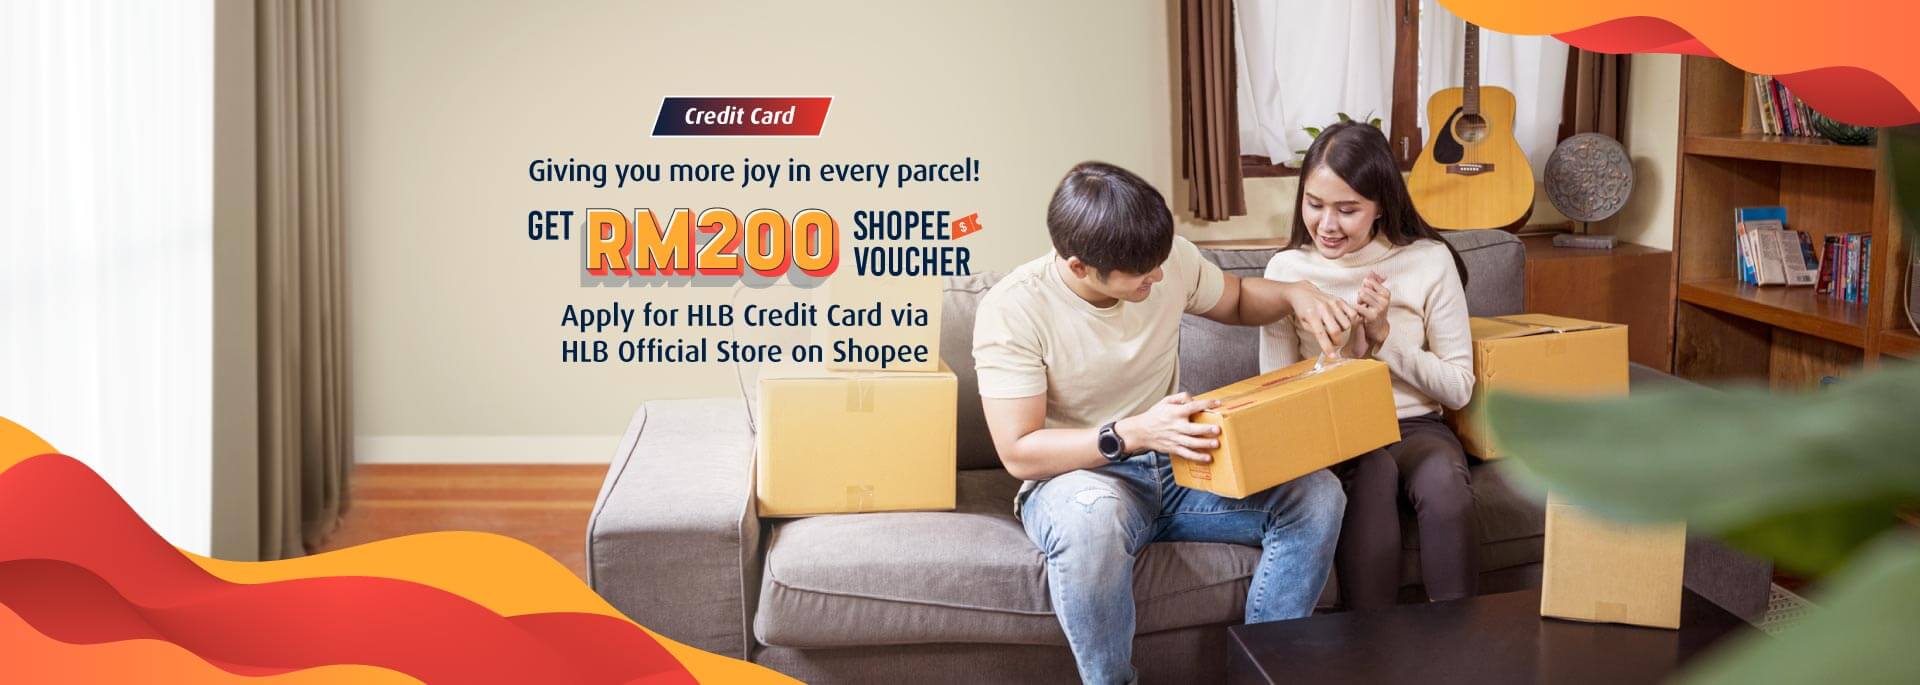 Apply for HLB Credit Card via HLB Official Store on Shopee